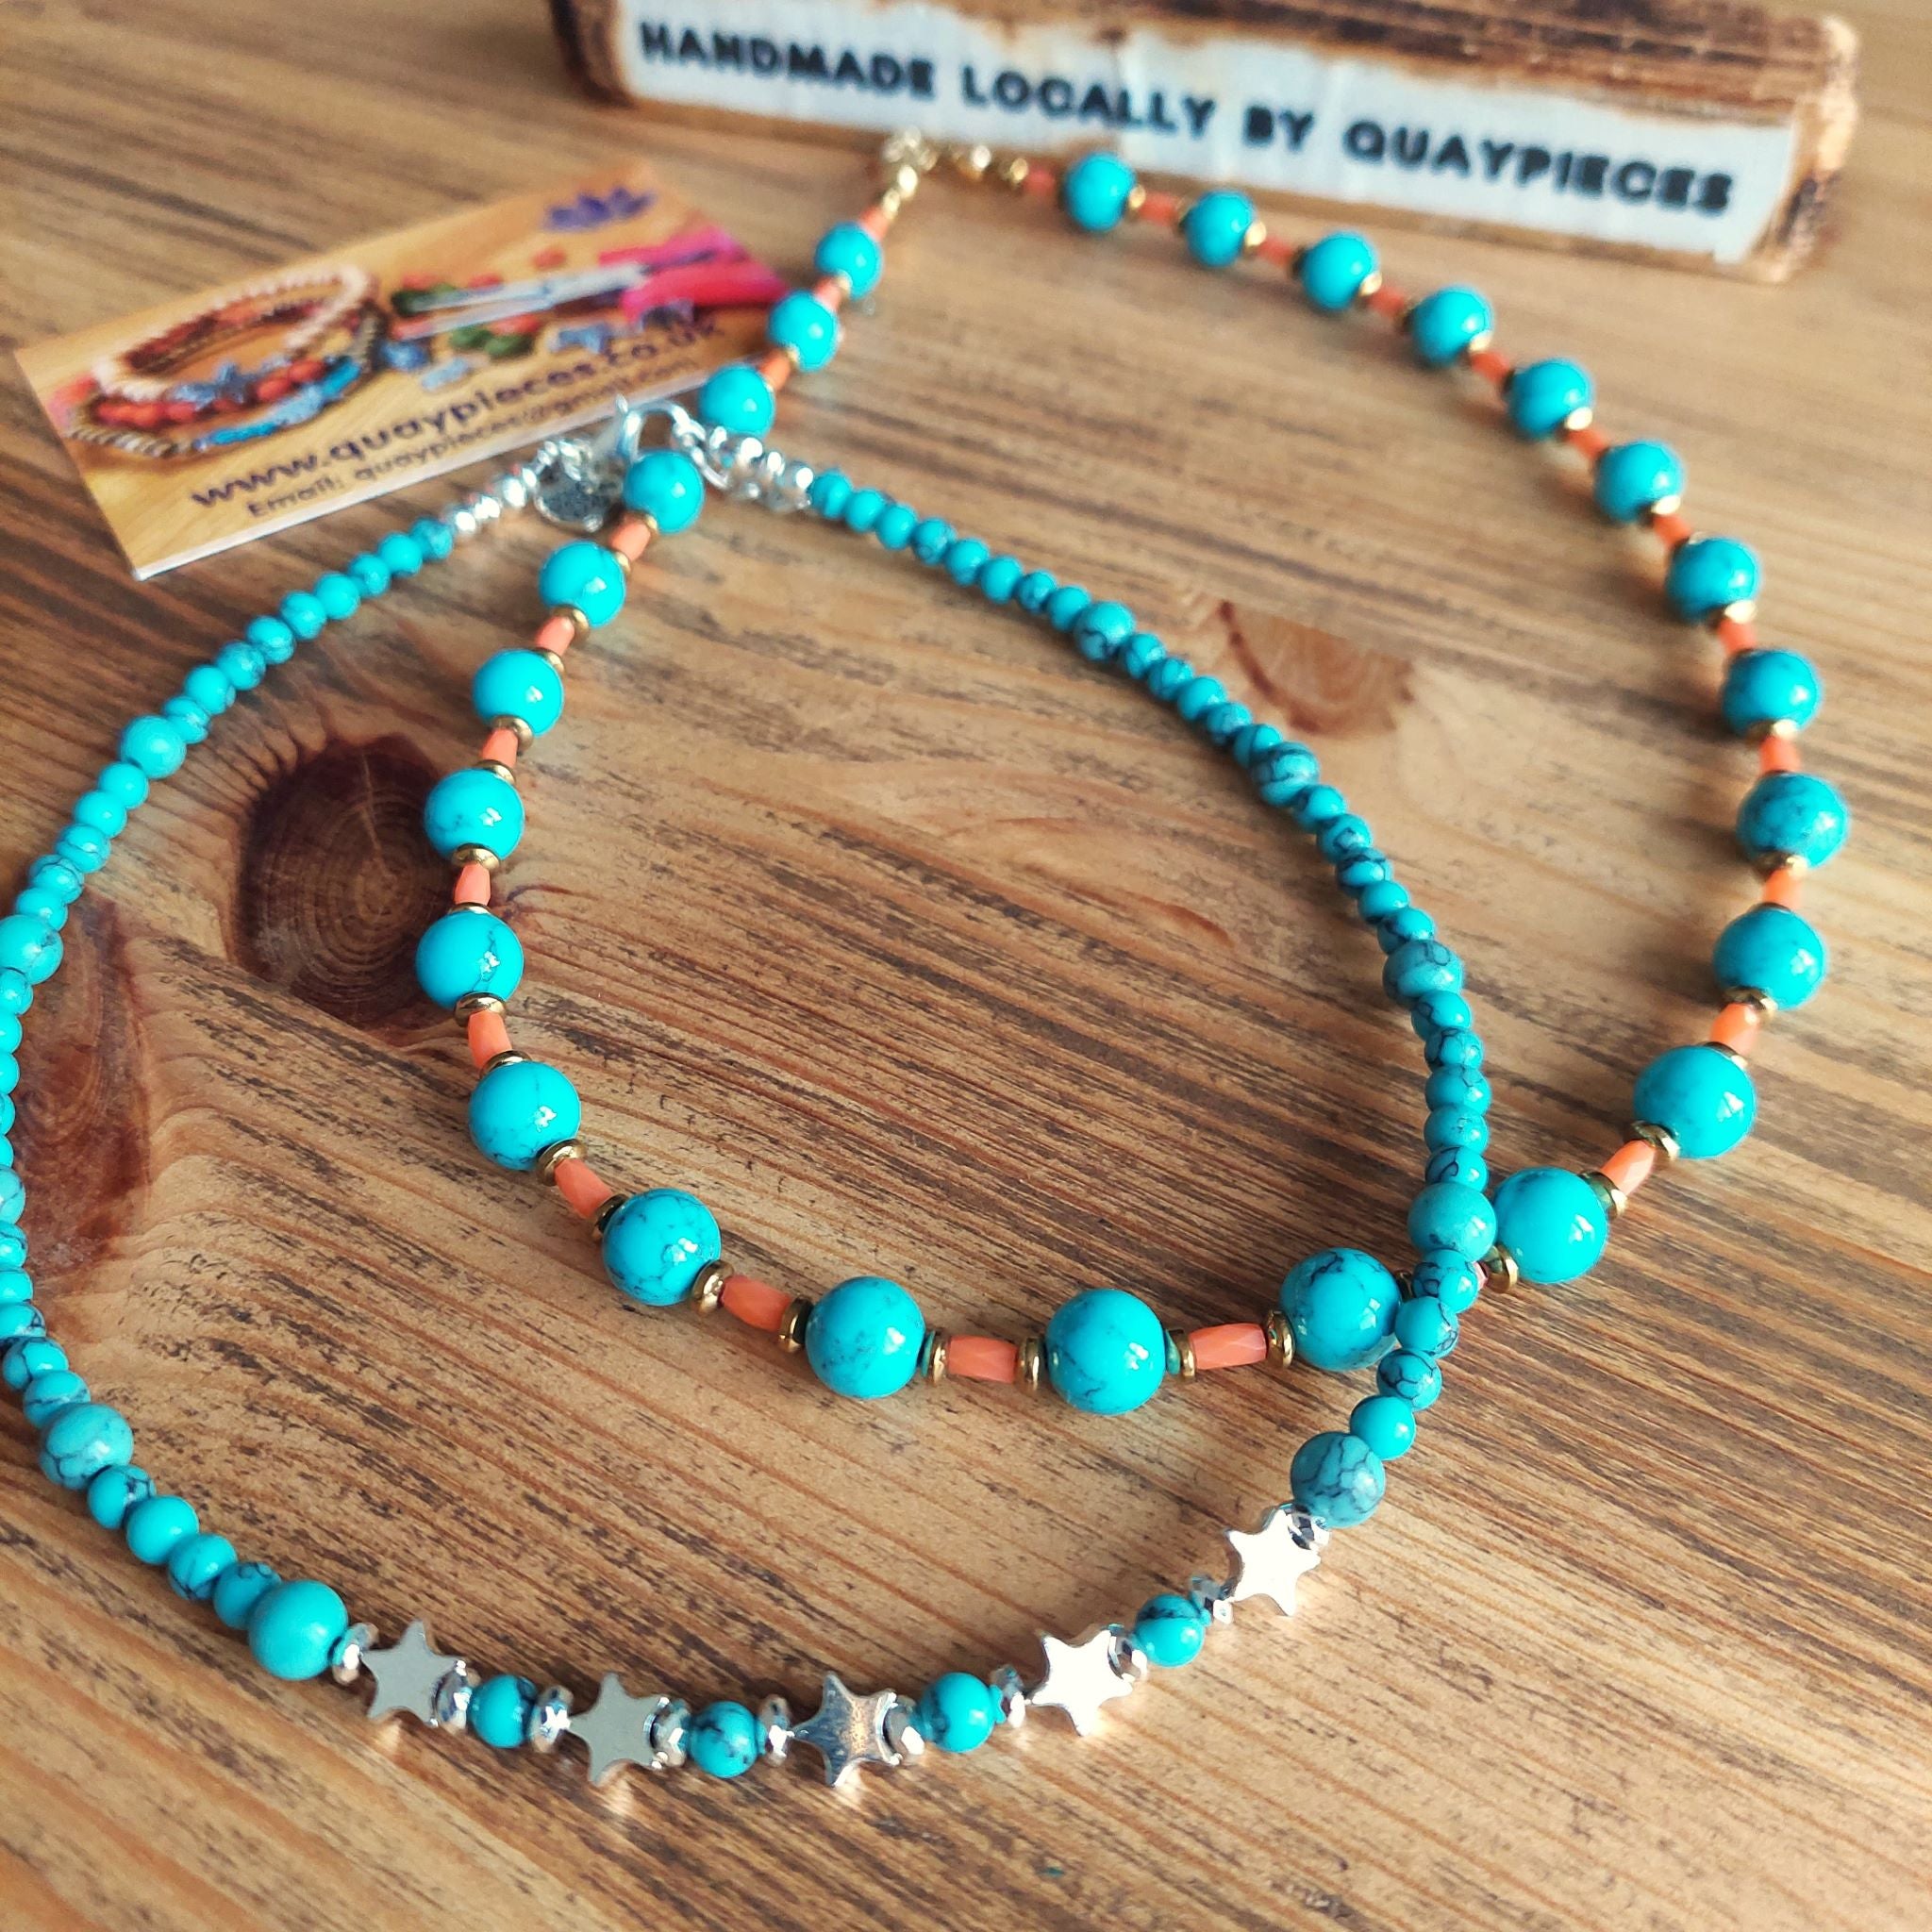 Lovely 8mm turquoise calcite beads & coral glass tubes with gold hematite discs  Gold plated fastenings & lobster clasp with gold (nickel free) star charm  Length - 47cm   Perfect for wearing with those snuggly winter jumpers!  **Presented in lovely Kraft paper gift box with reusable organza pouch**